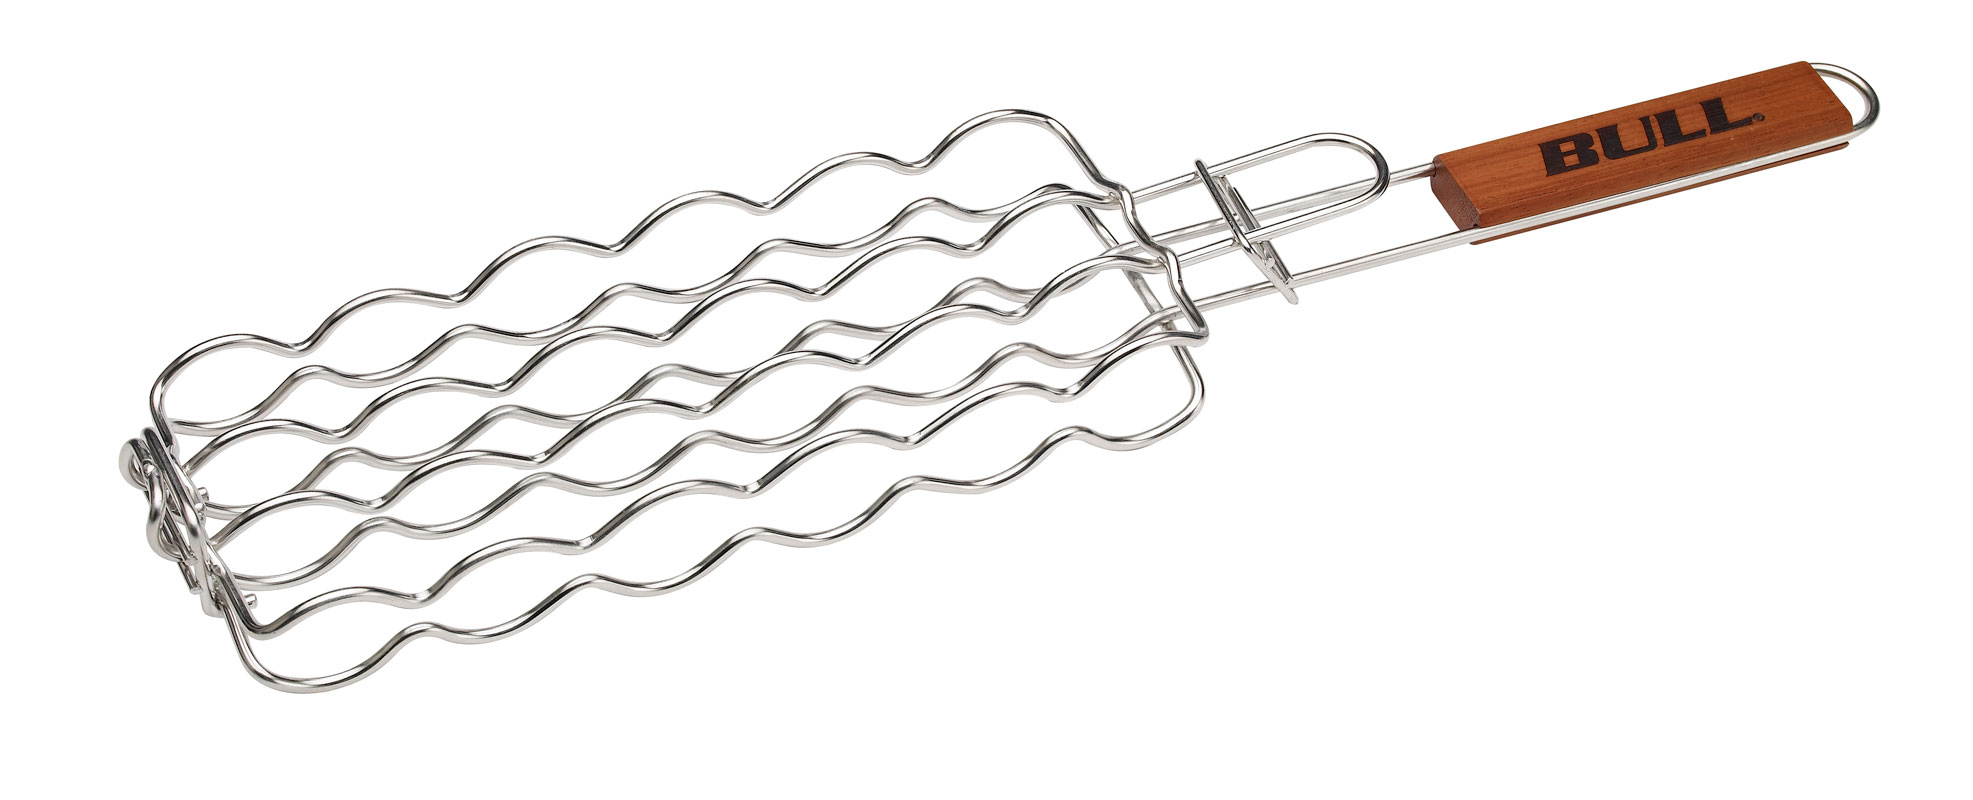 BULL Stainless Sausage Grilling Basket